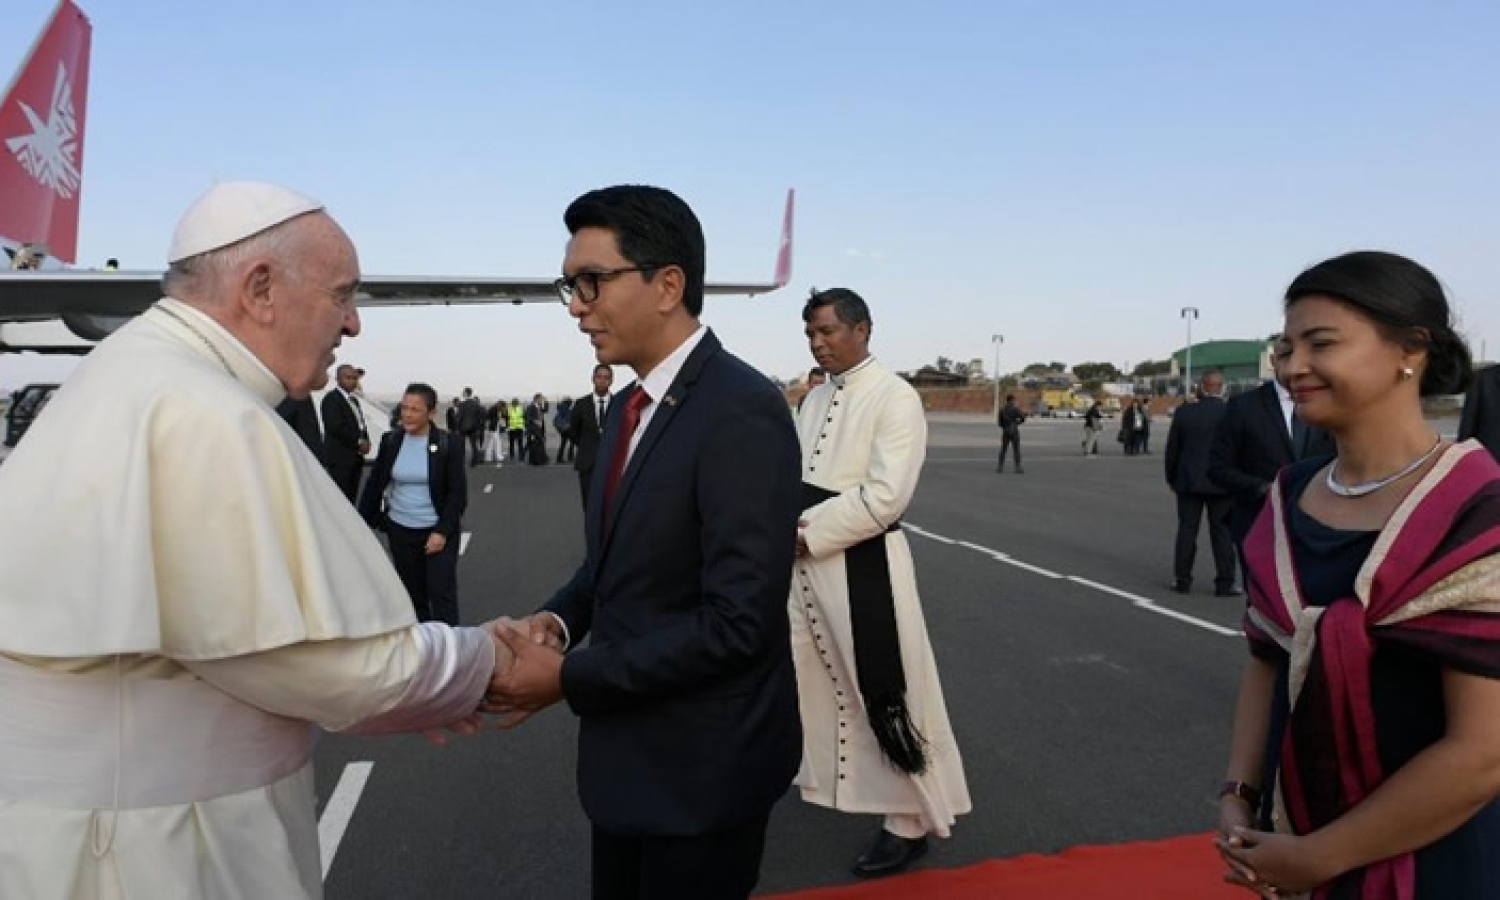 The papal plane taking Pope Francis to Madagascar, for the second leg of his Apostolic Visit